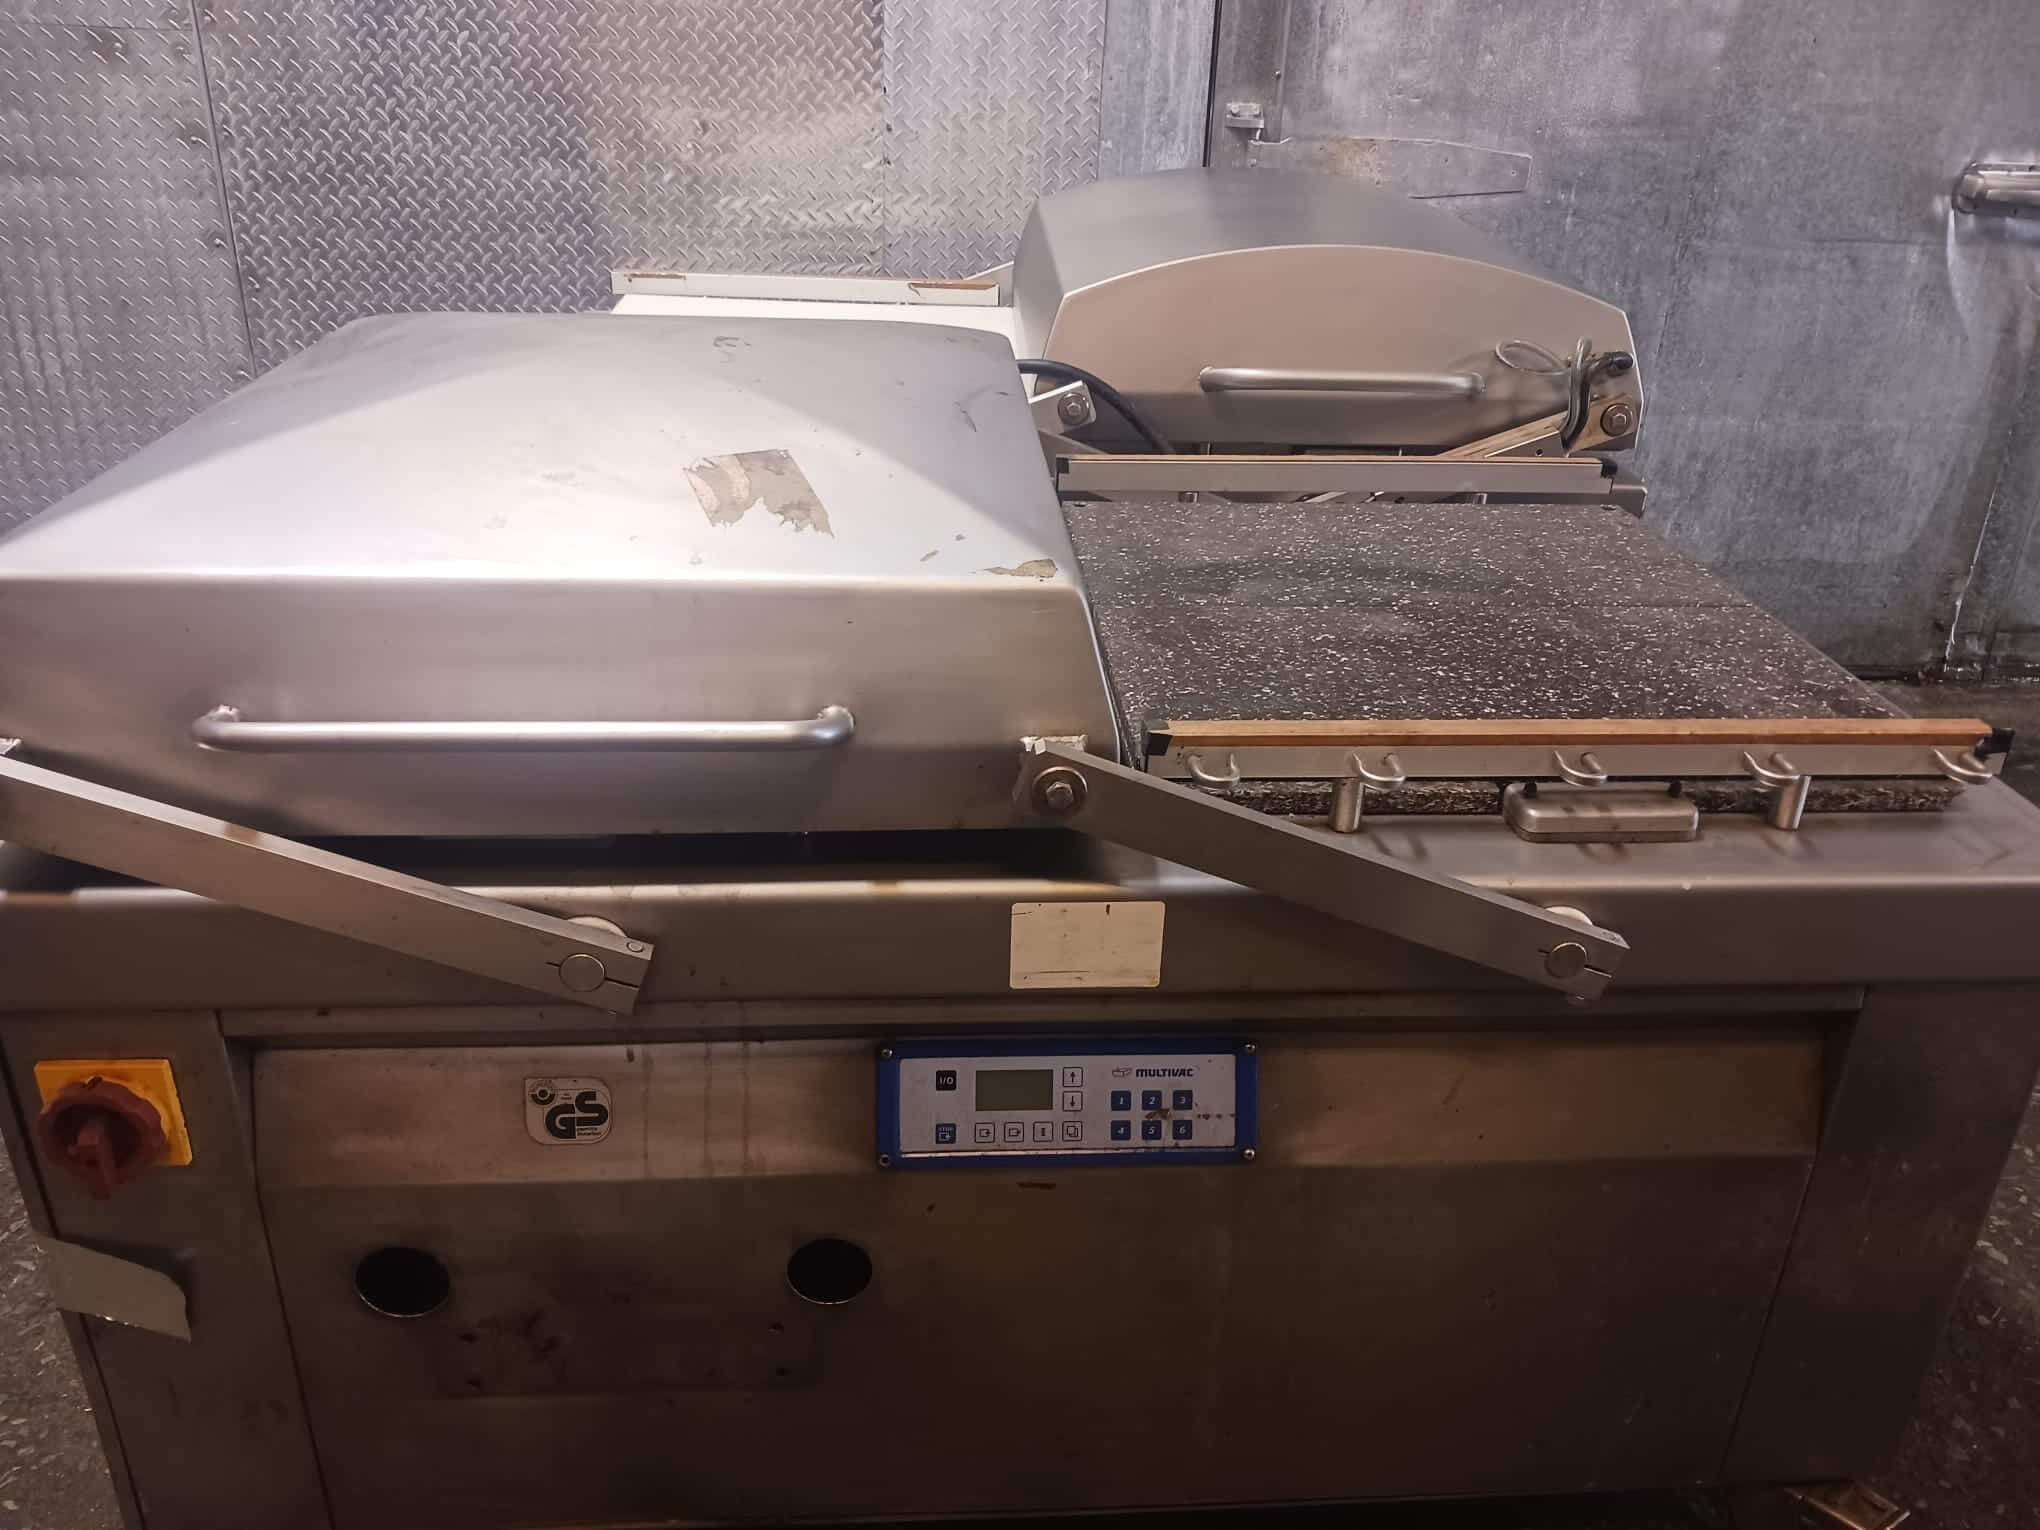 Ground Meat Packing Kit/ Painted Tape Machine, 200 1lb Ground Beef Bags